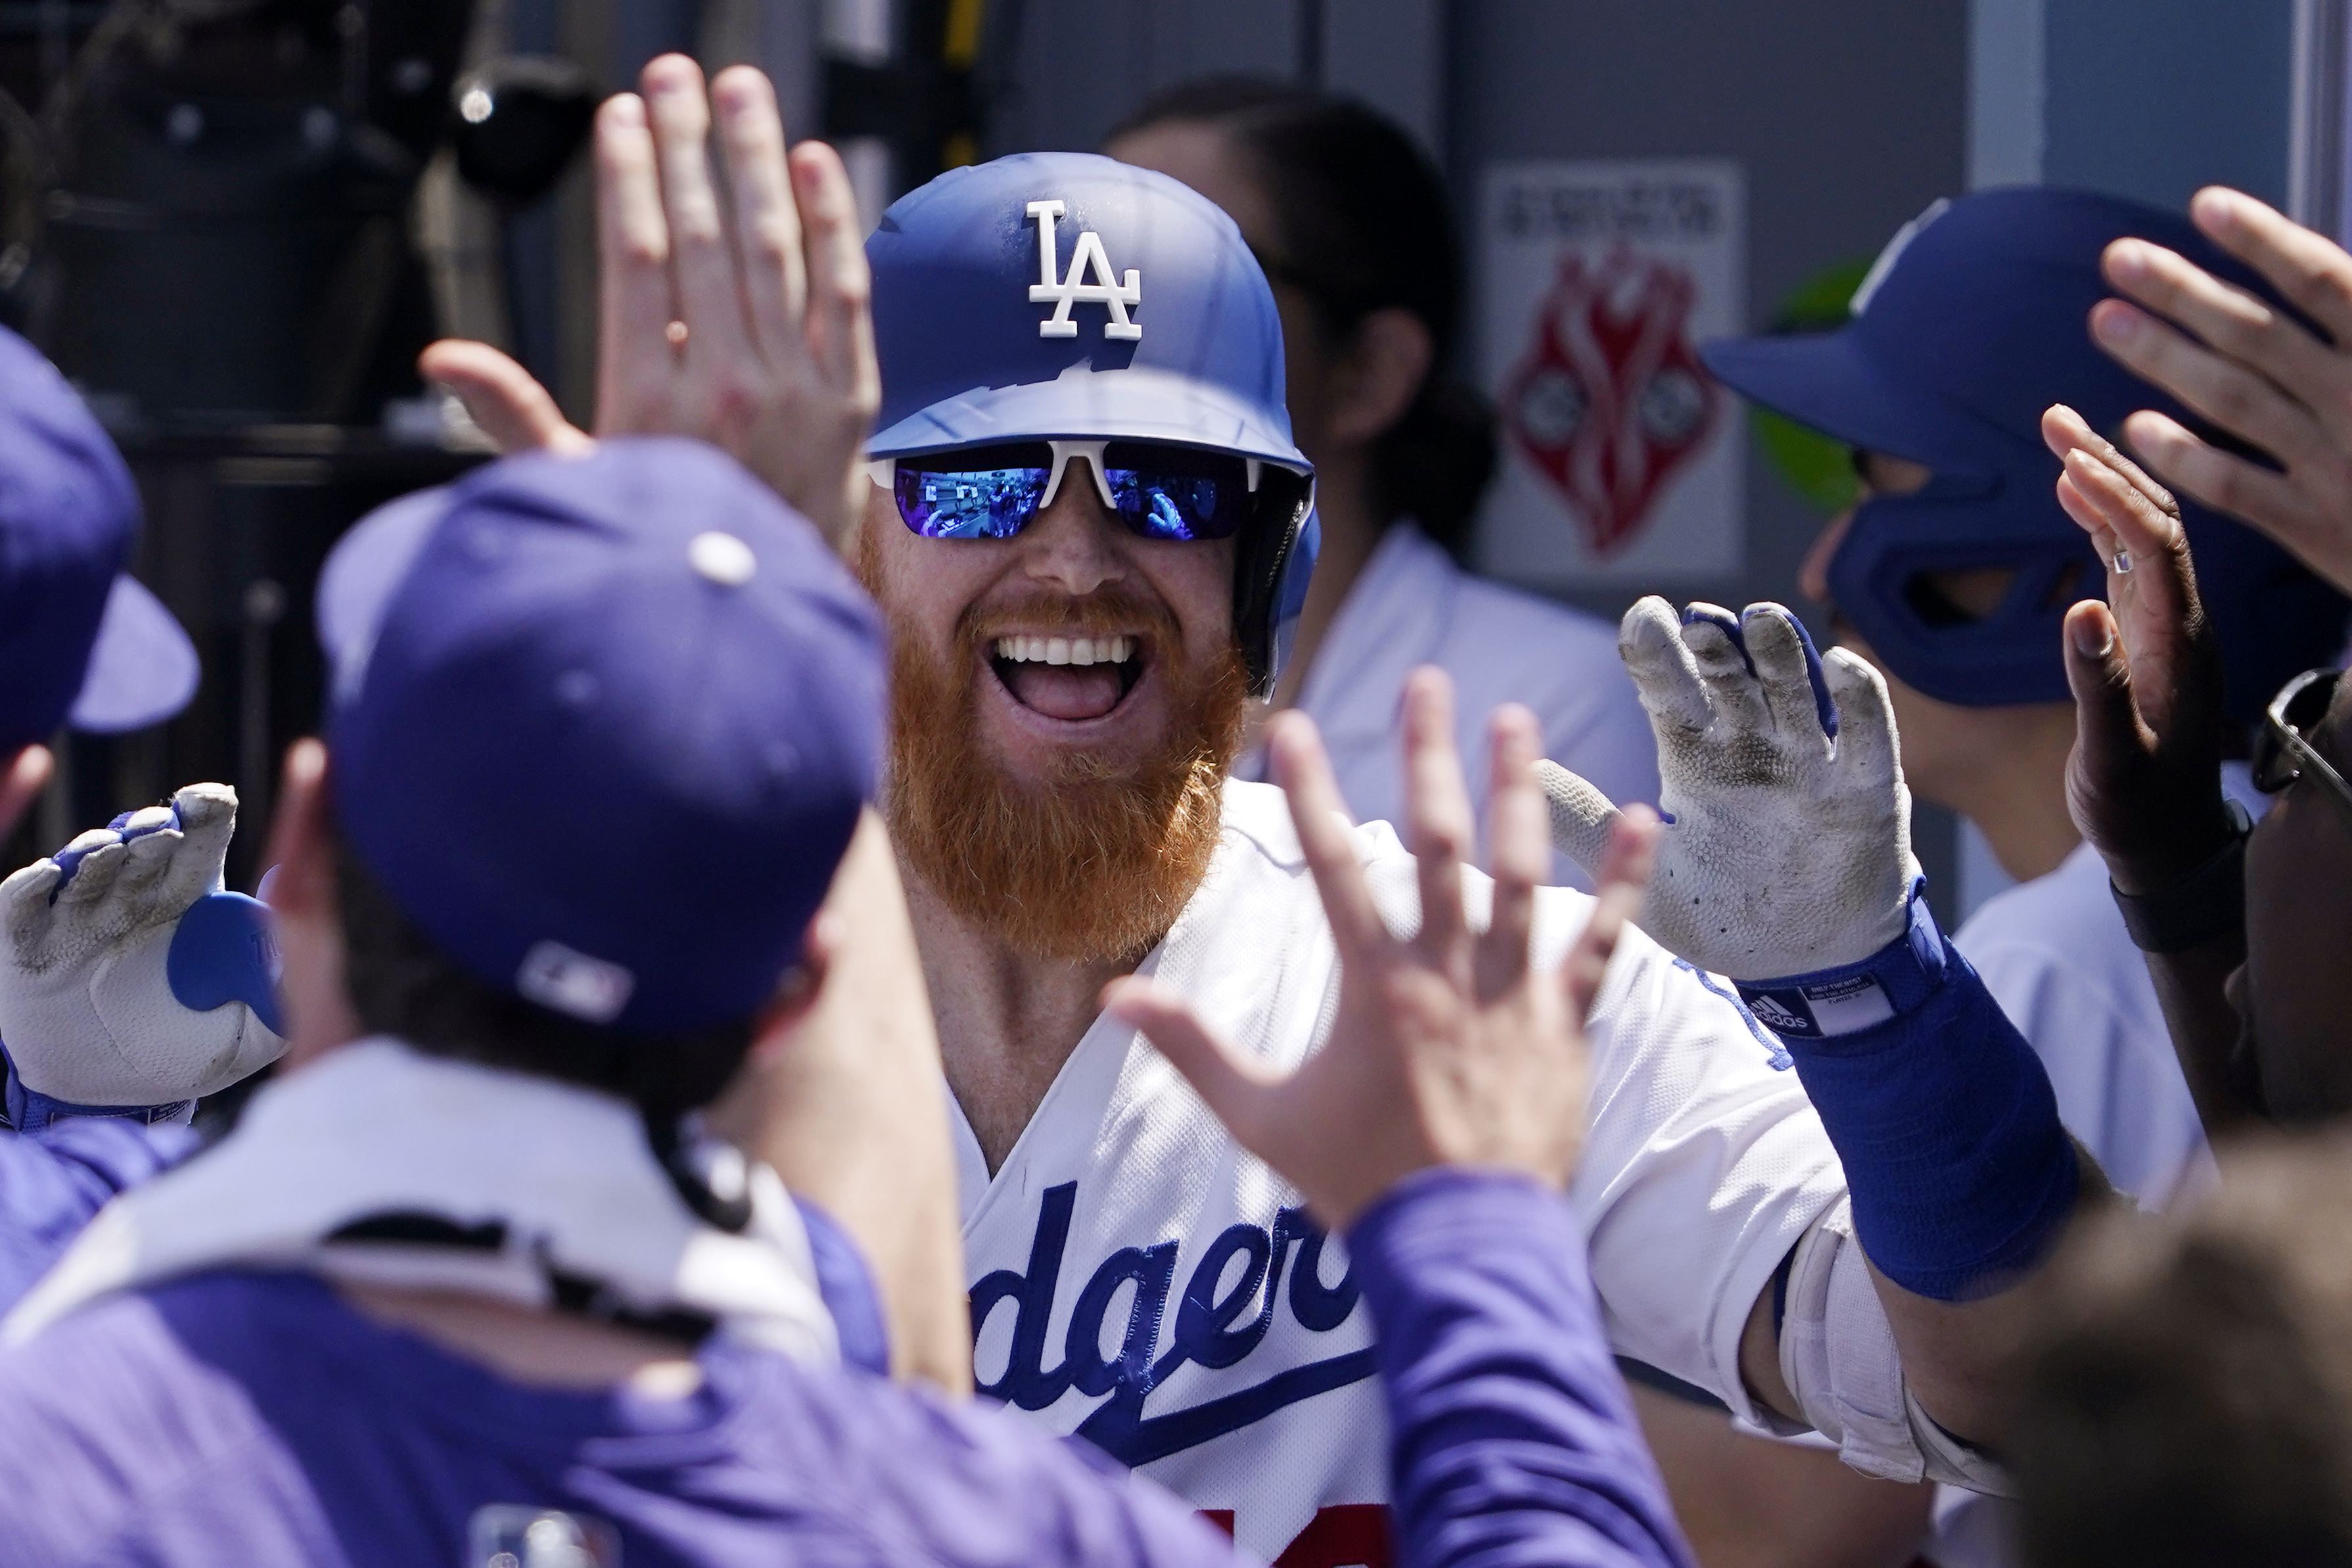 Dodgers blast 7 home runs, send Rockies to 12th loss in 14 games